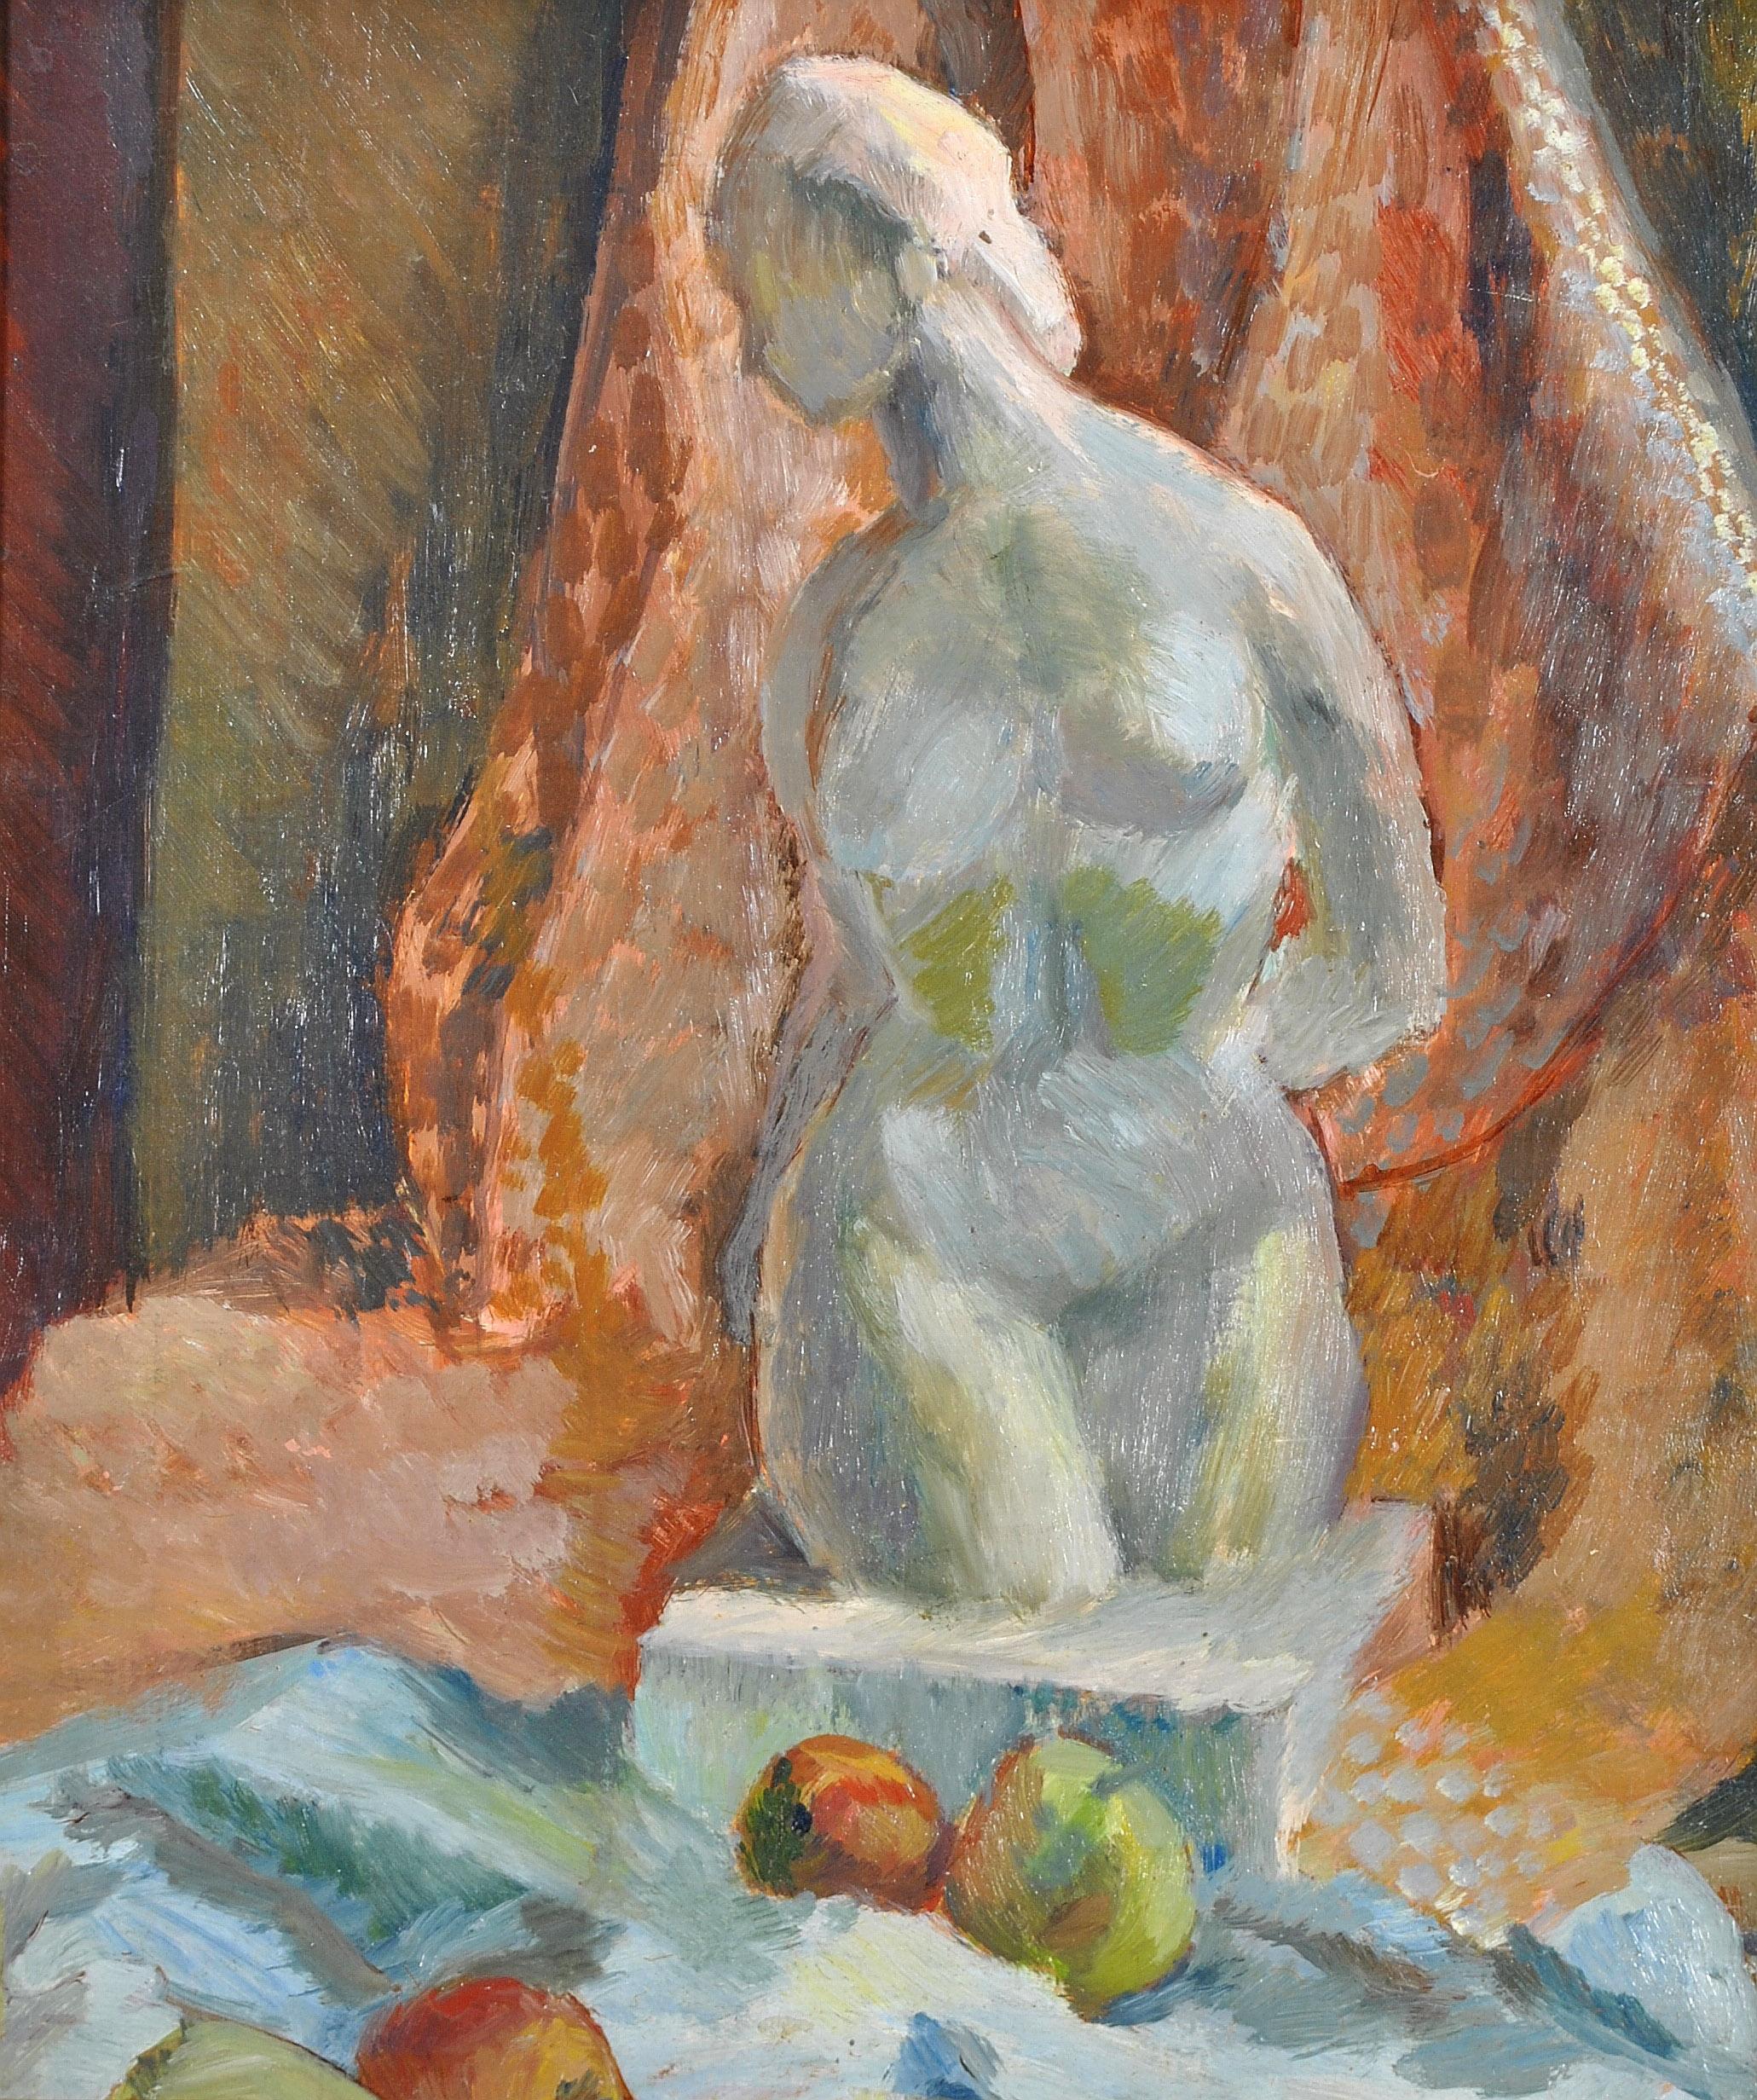 A beautiful 1950's French impressionist oil on board still life depicting a bust length sculpture of a lady and fruits. Excellent quality atmospheric work, with a street scene painted on the reverse. Presented in a painted and gilded frame.

Artist: